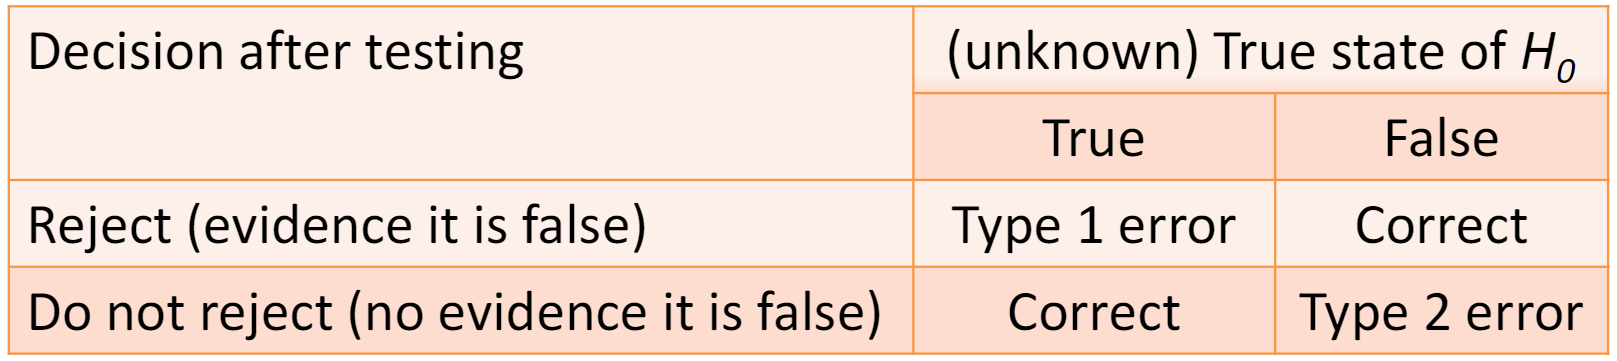 tabular representation of type I and II error. If we reject a true H0 we have made a type I error; if we do not reject a true H0 we have not made an error. If we do not reject a false H0 we have not made an error; if we do reject a false H0 we have made a type II error